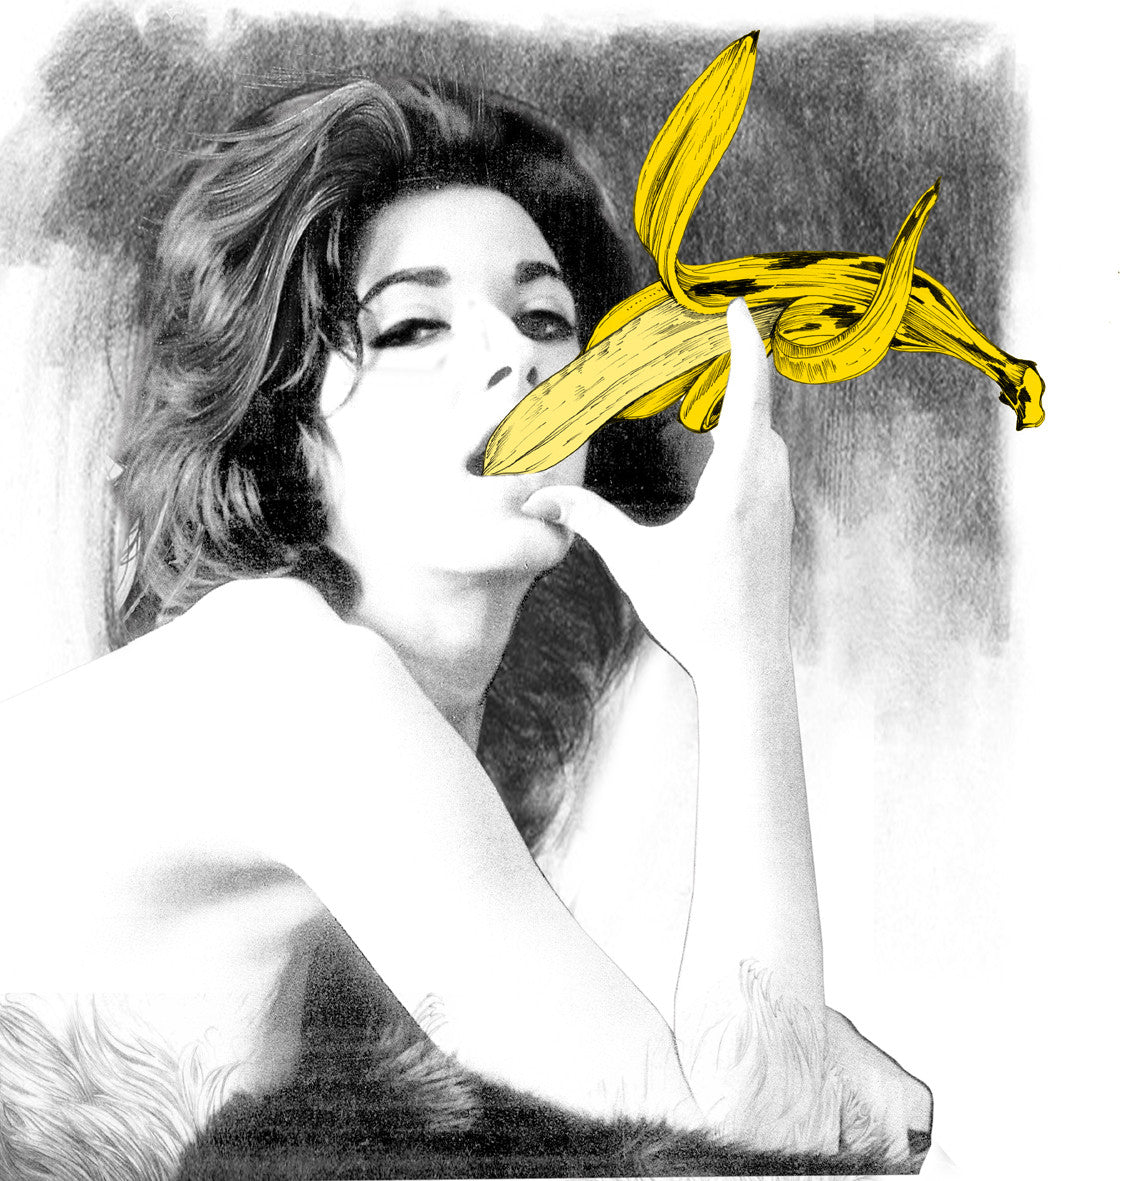 Limited Edition Print 'Banana Eater' - Sarah Howell Limited Edition - 1